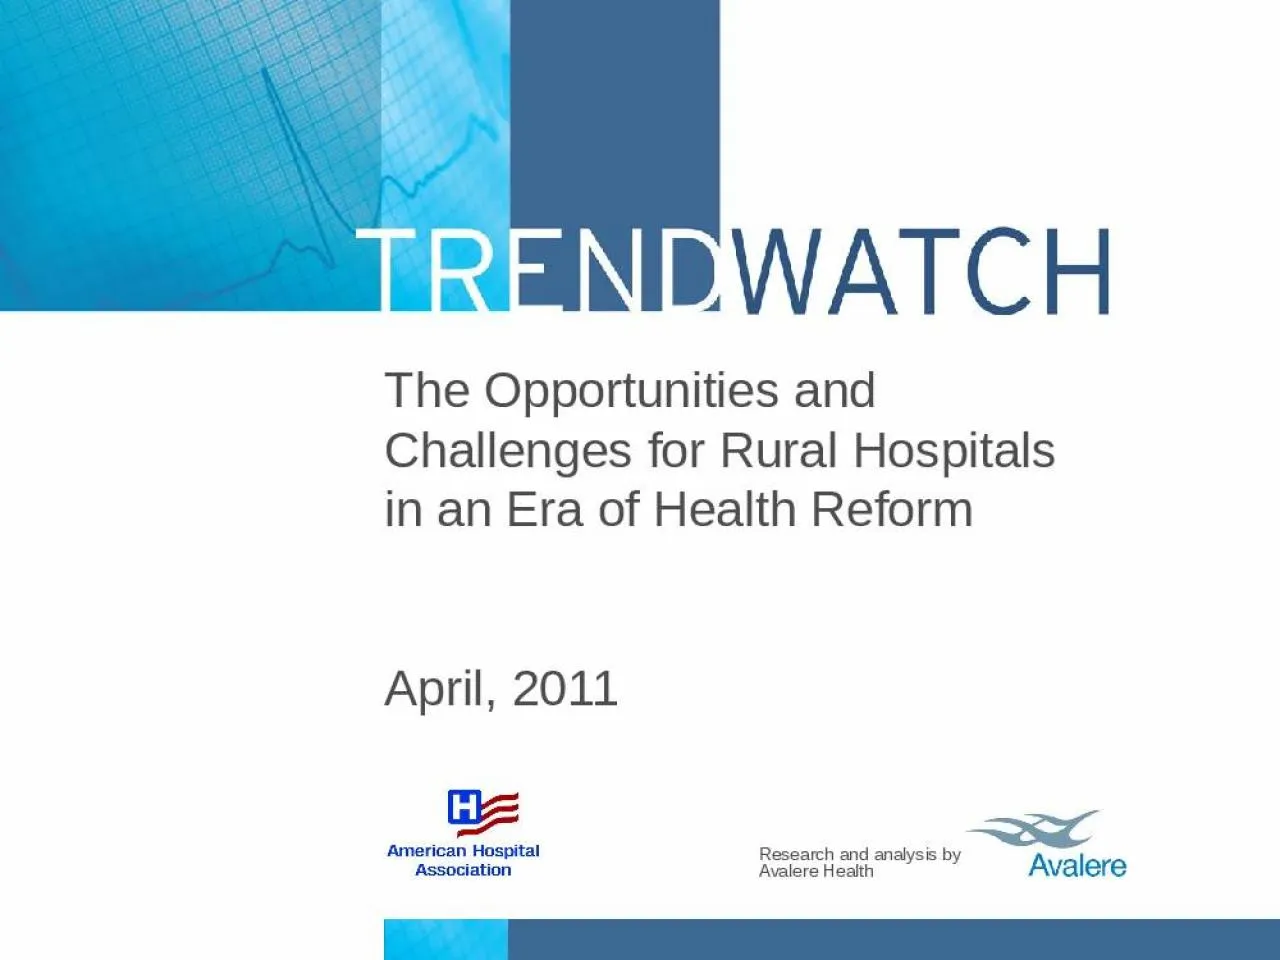 The Opportunities and Challenges for Rural Hospitals in an Era of